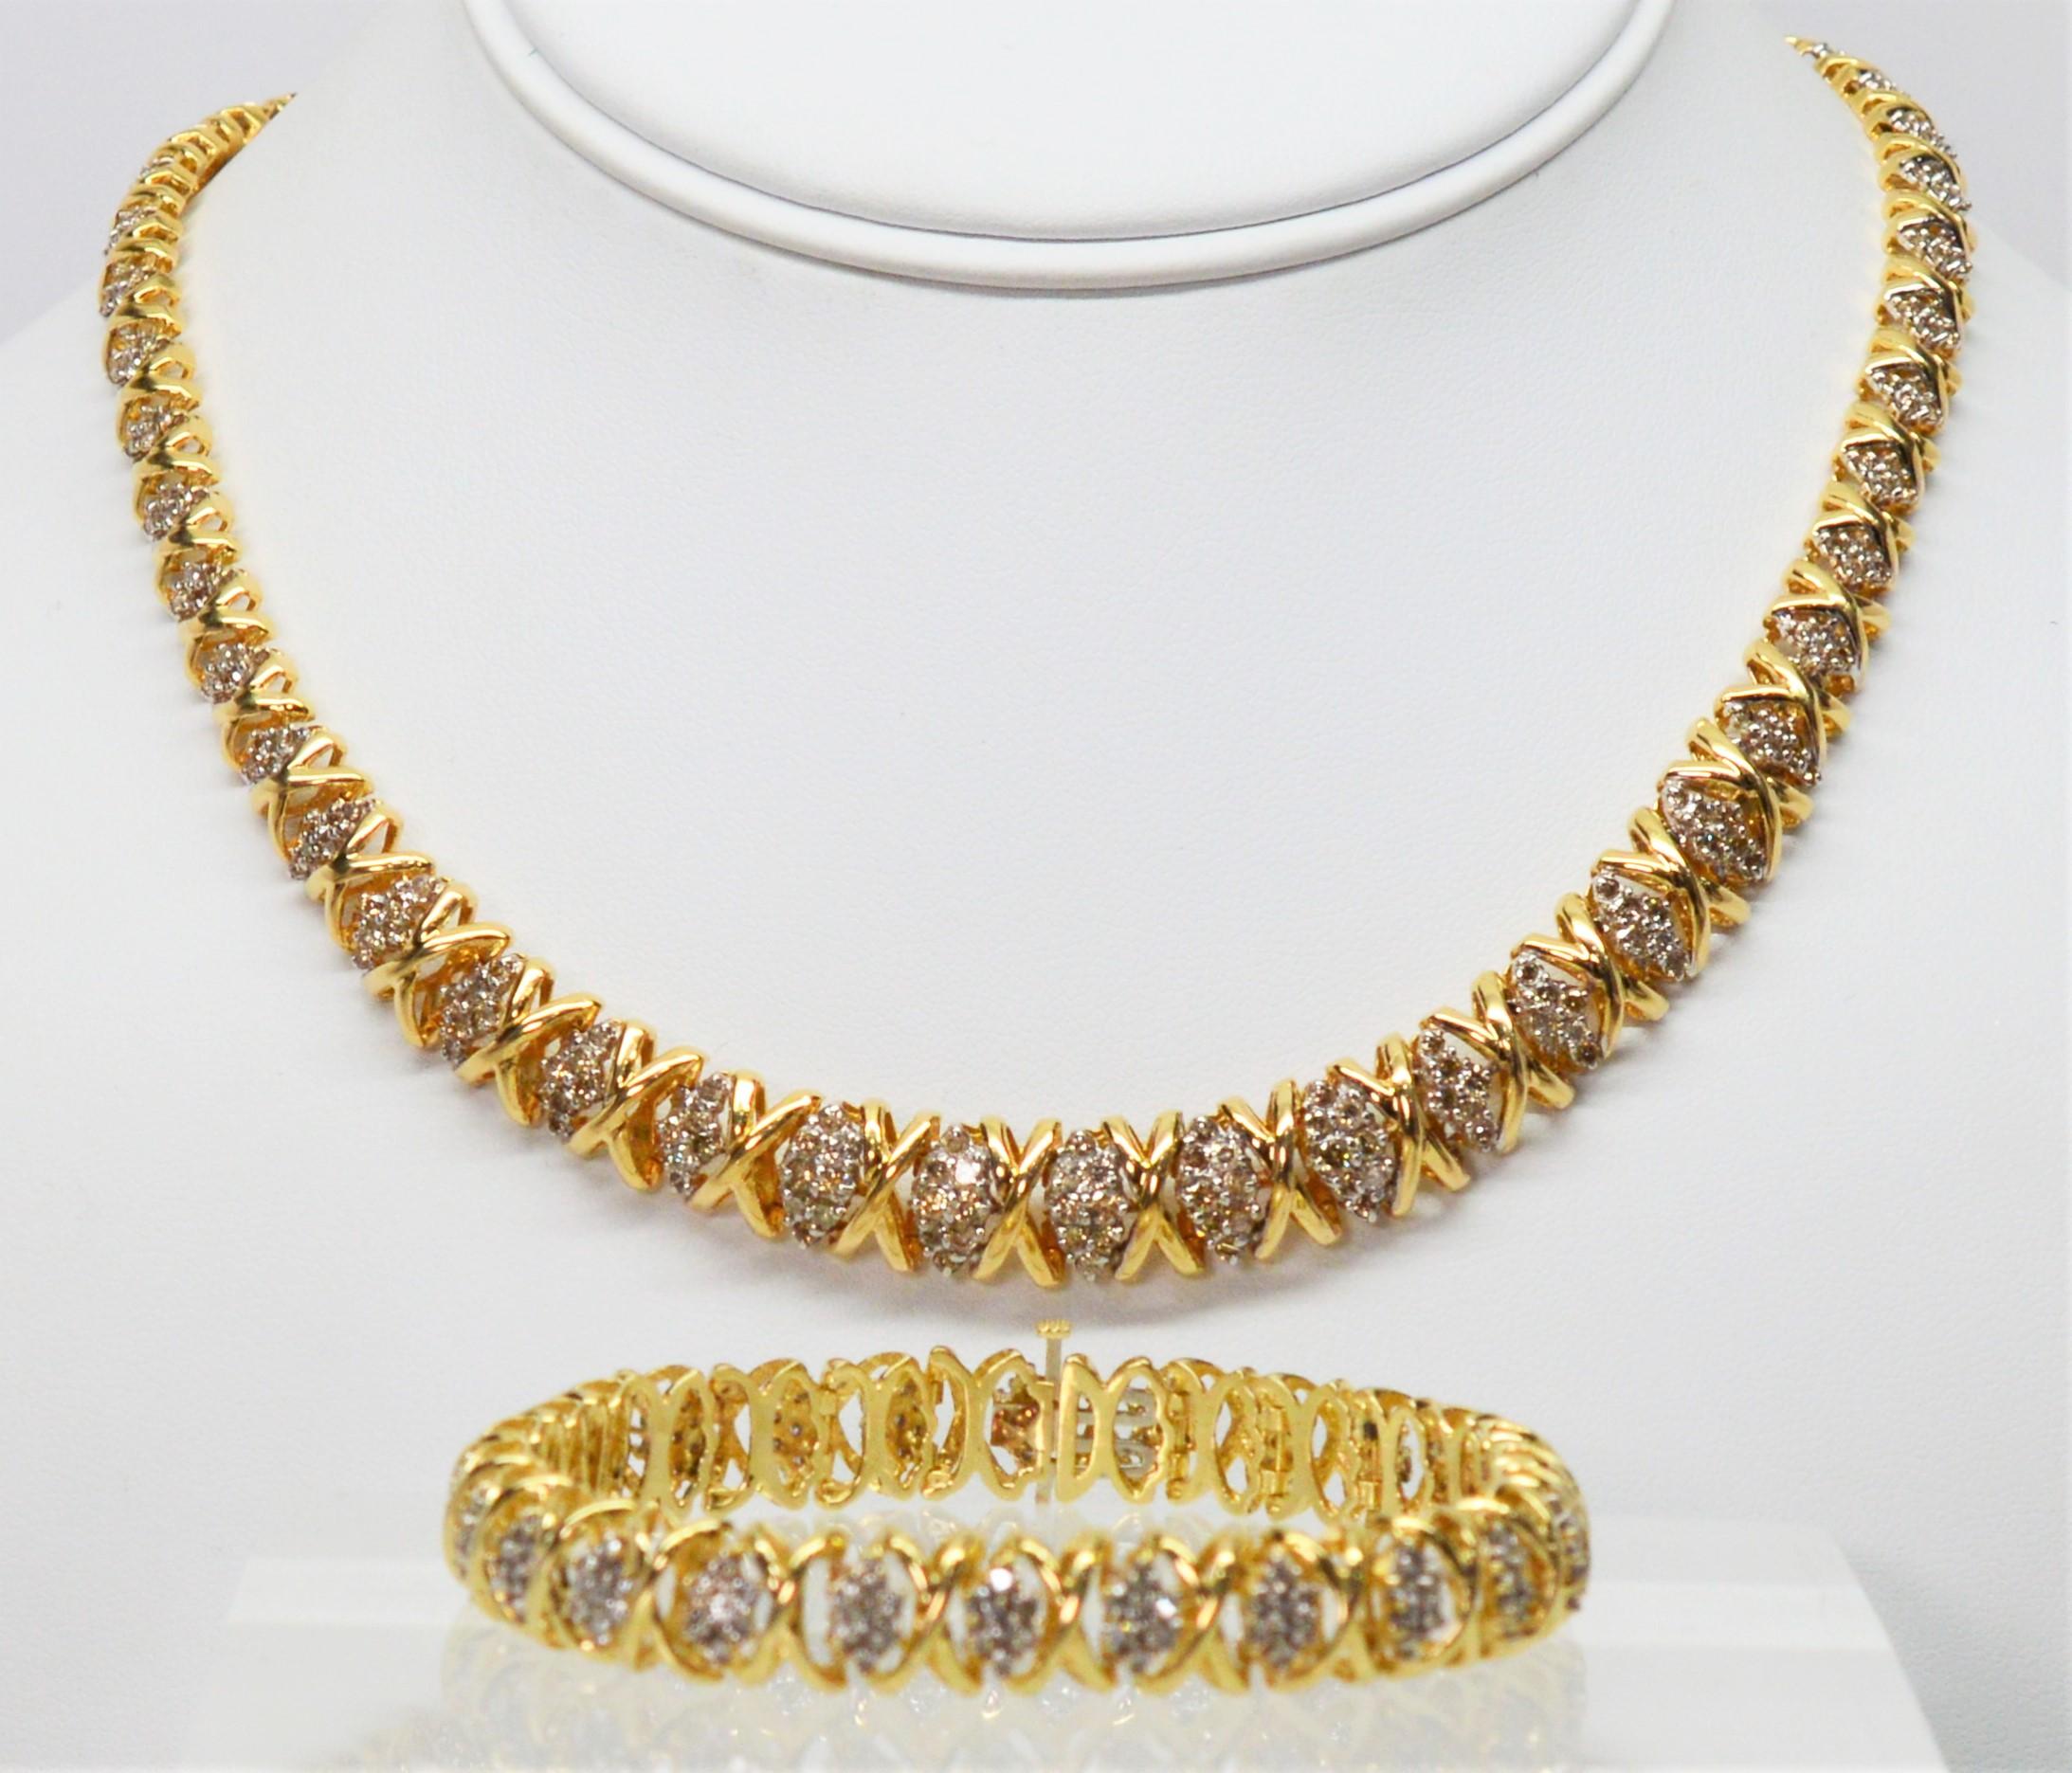 Stunning diamond clusters crossed with yellow gold make this timeless necklace and bracelet set an exquisite selection for that special occasion. Each separate link is crafted with four round diamond stones that are prong set in a marquise shape